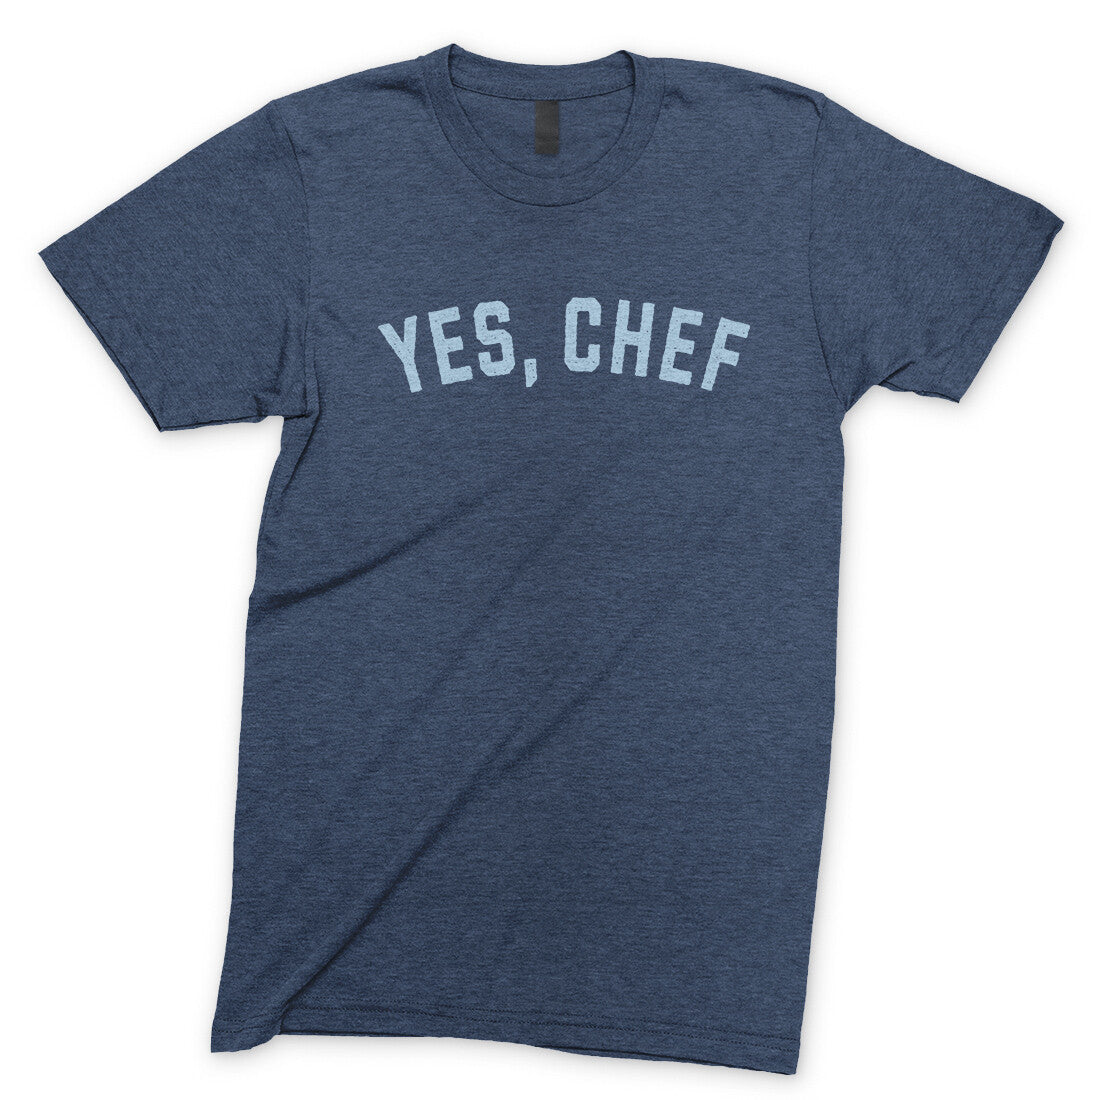 Yes Chef in Navy Heather Color